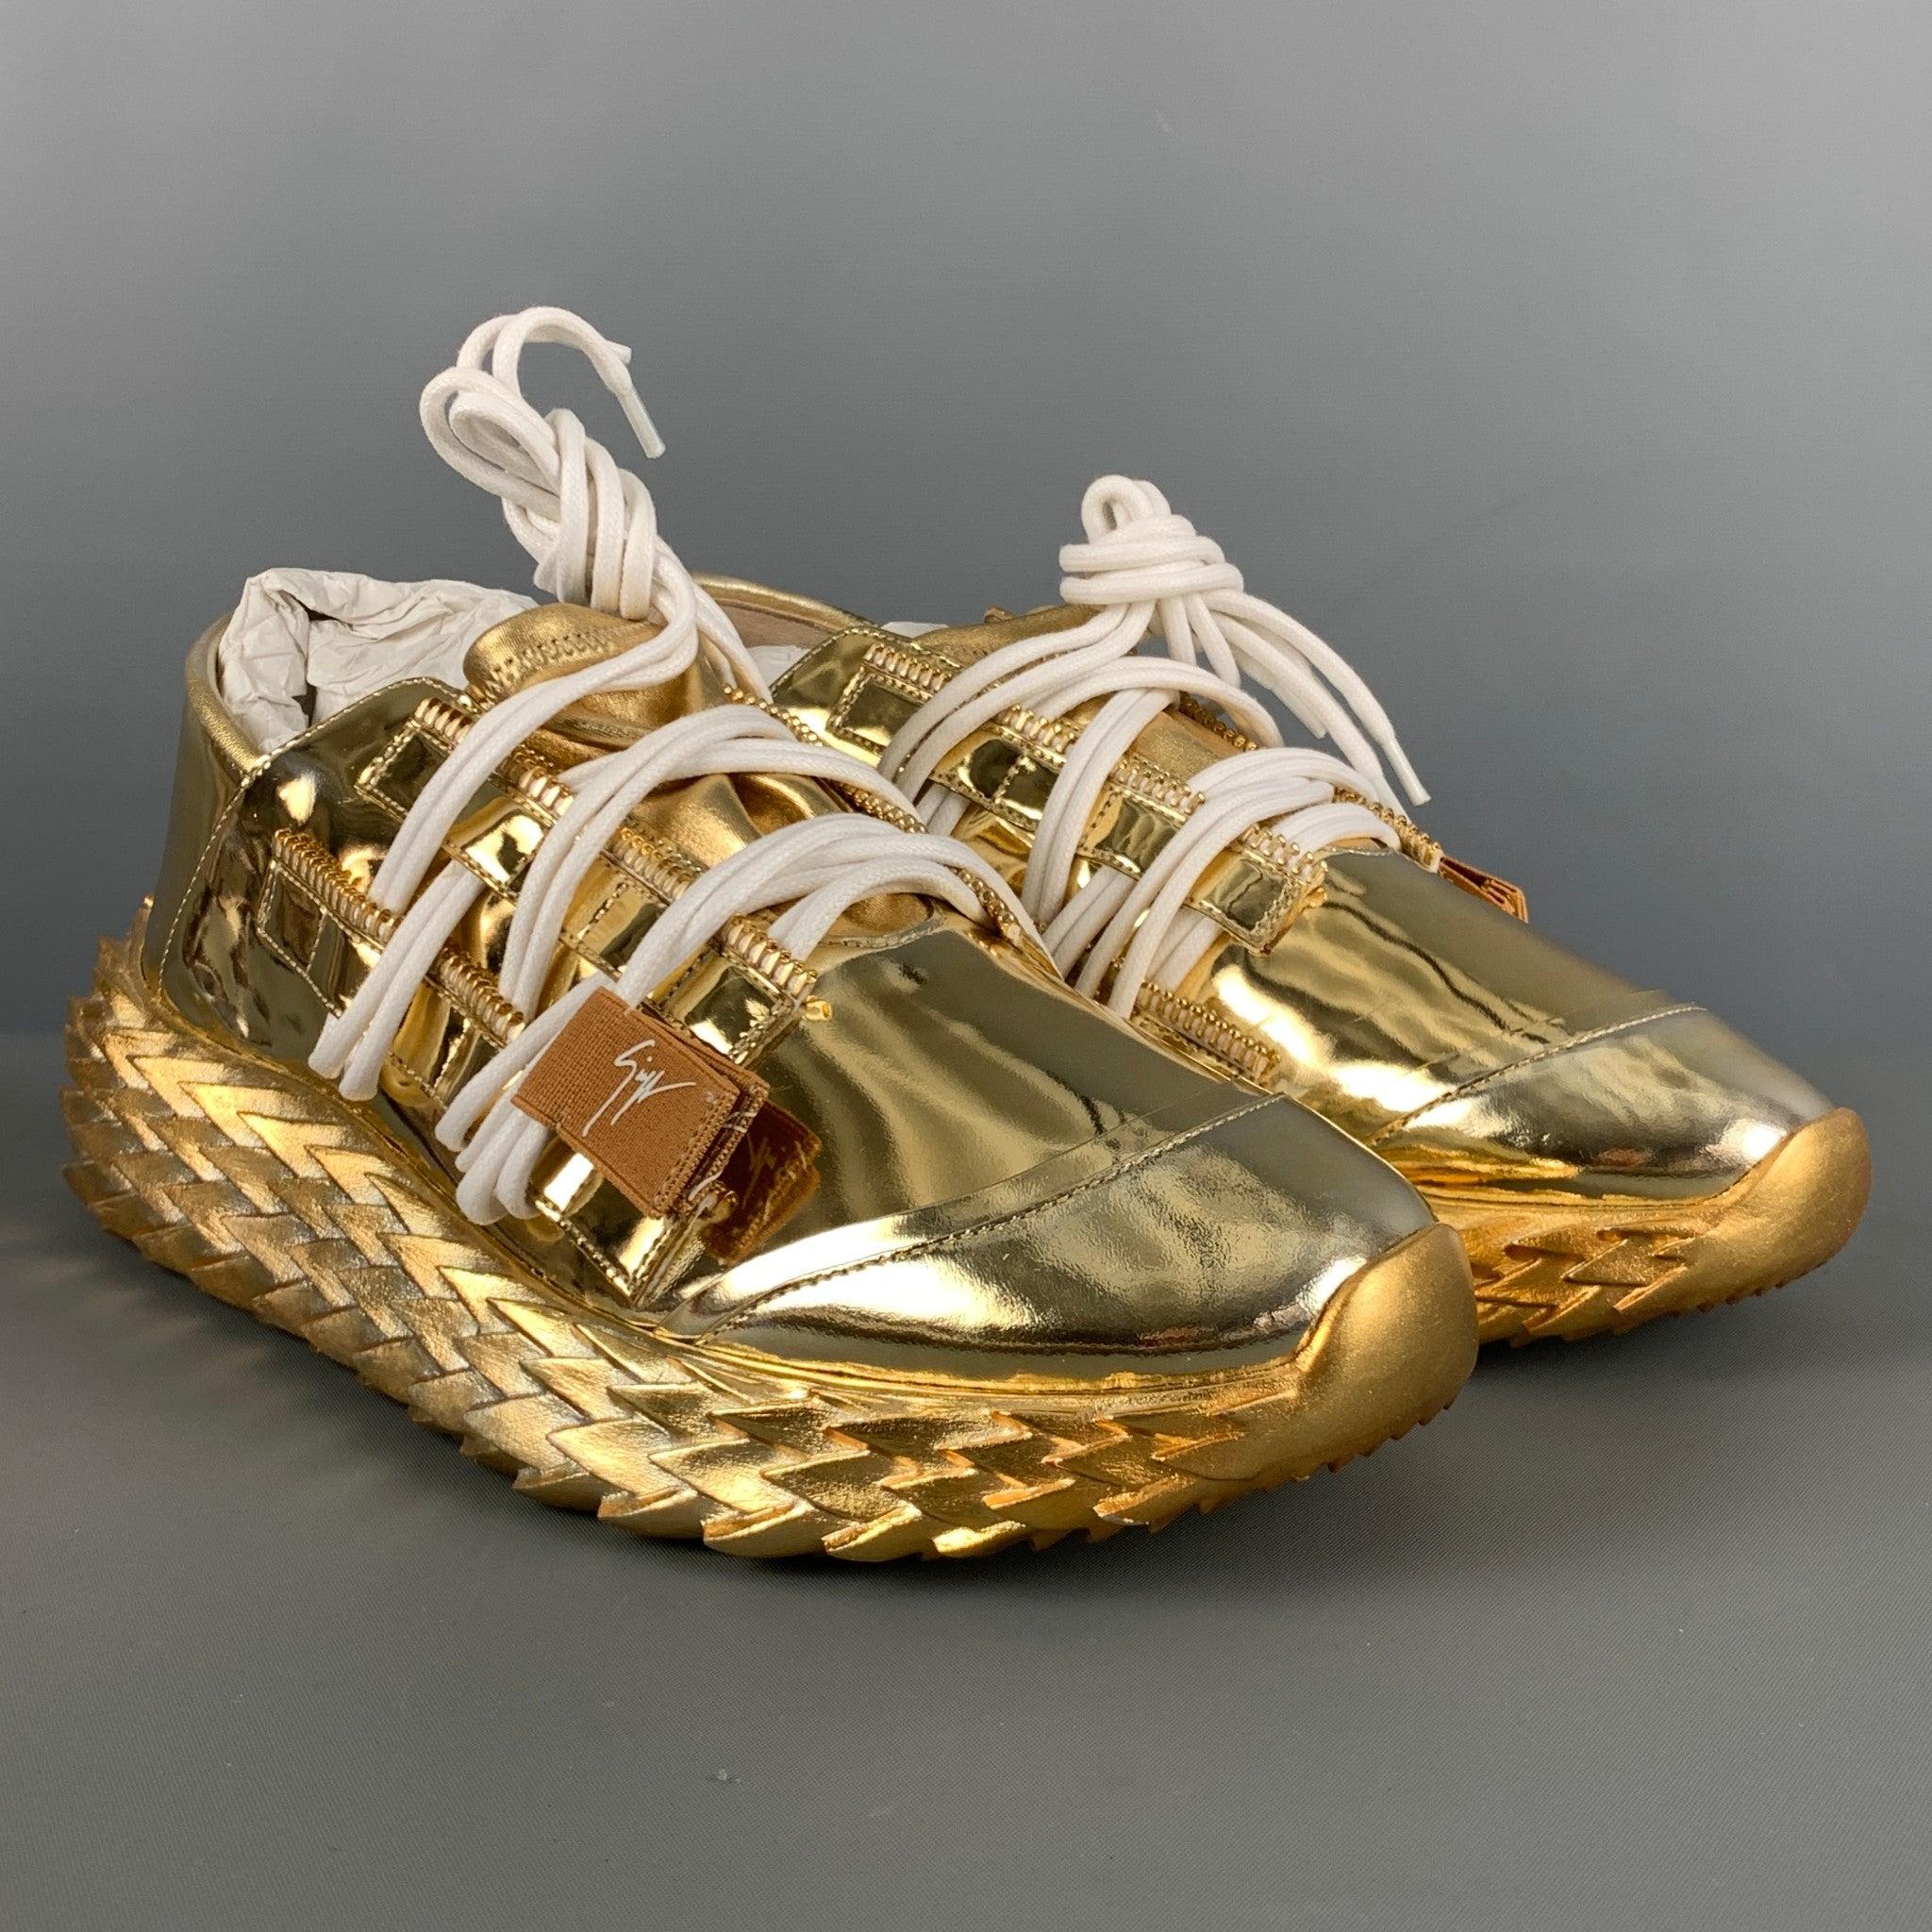 GIUSEPPE ZANOTTI URCHIN sneakers comes in a metallic gold patent leather featuring a gold chunky rubber sole, low-top style, and a white lace up closure. Made in Italy. Comes with box.Very Good Pre-Owned Condition. 

Marked:   9Outsole: 11.5 inches 